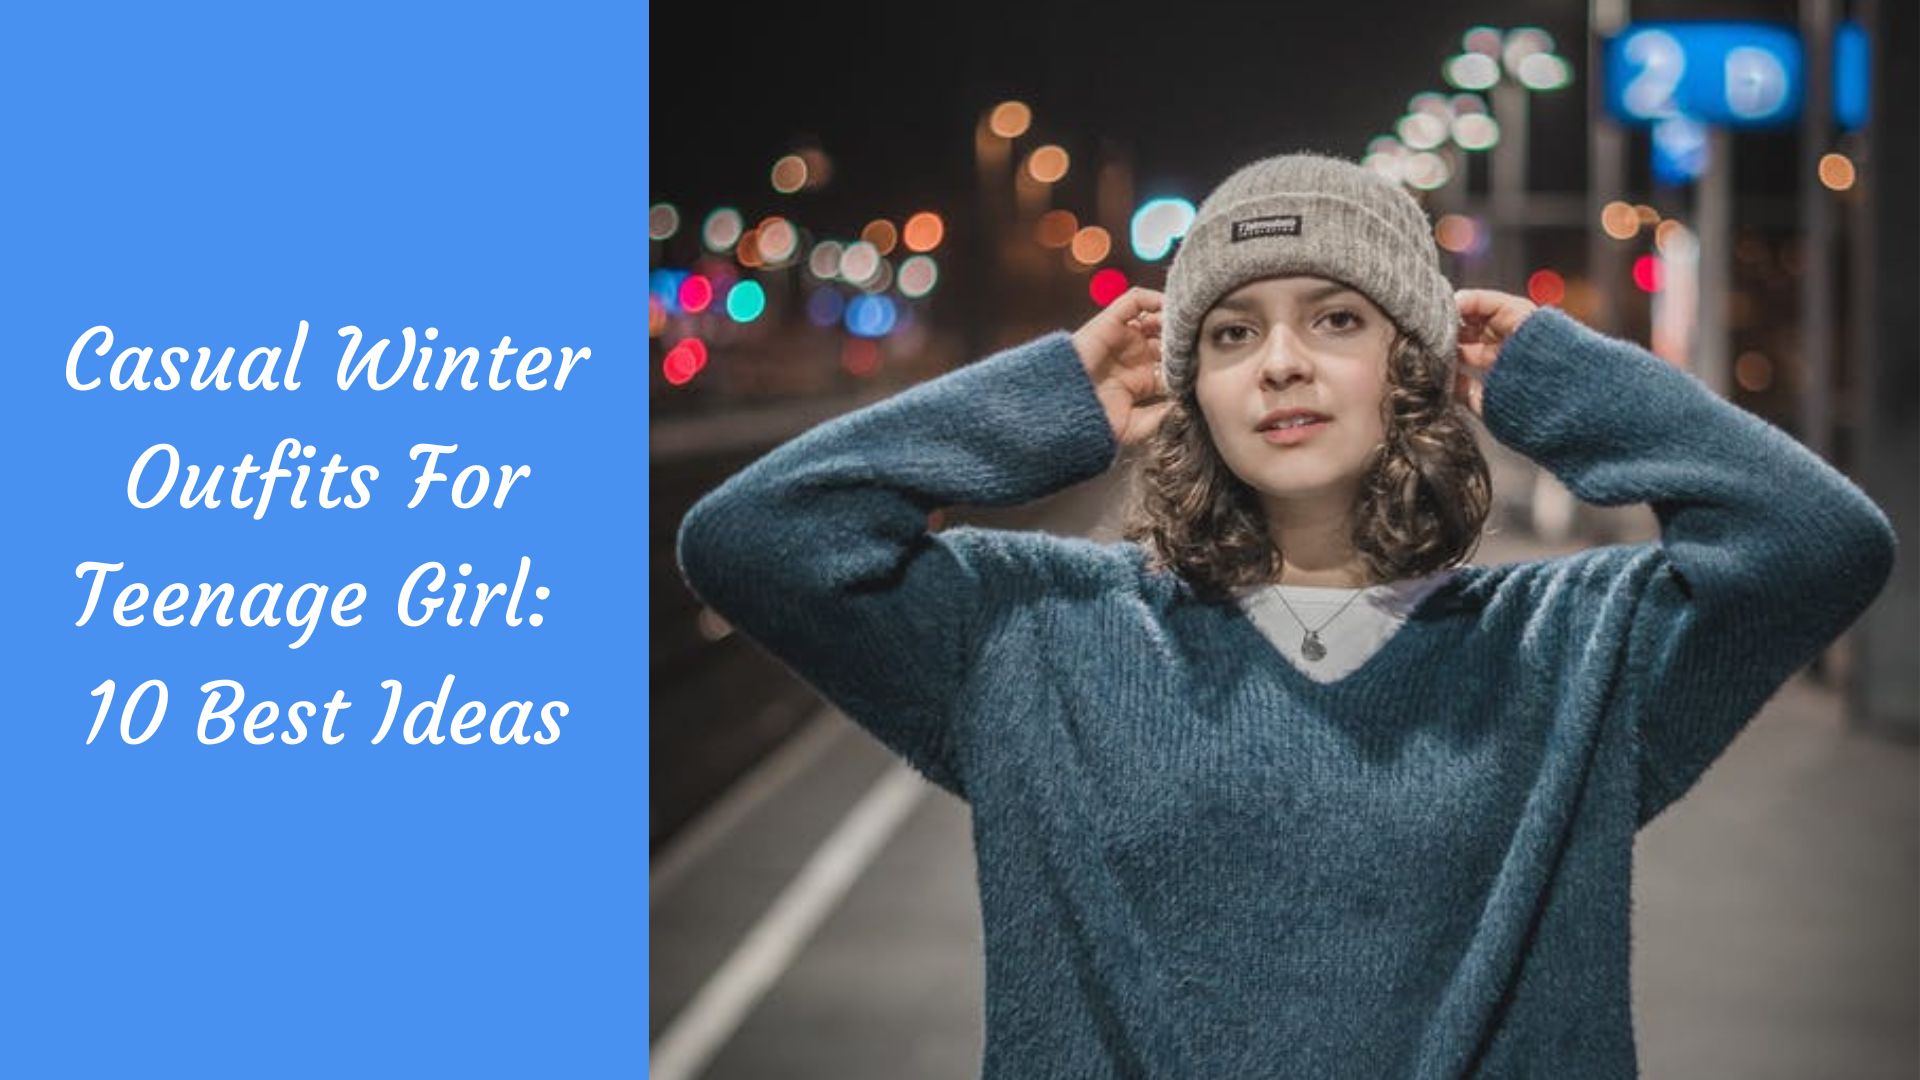 Casual Winter Outfits For Teenage Girl: 10 Best Ideas